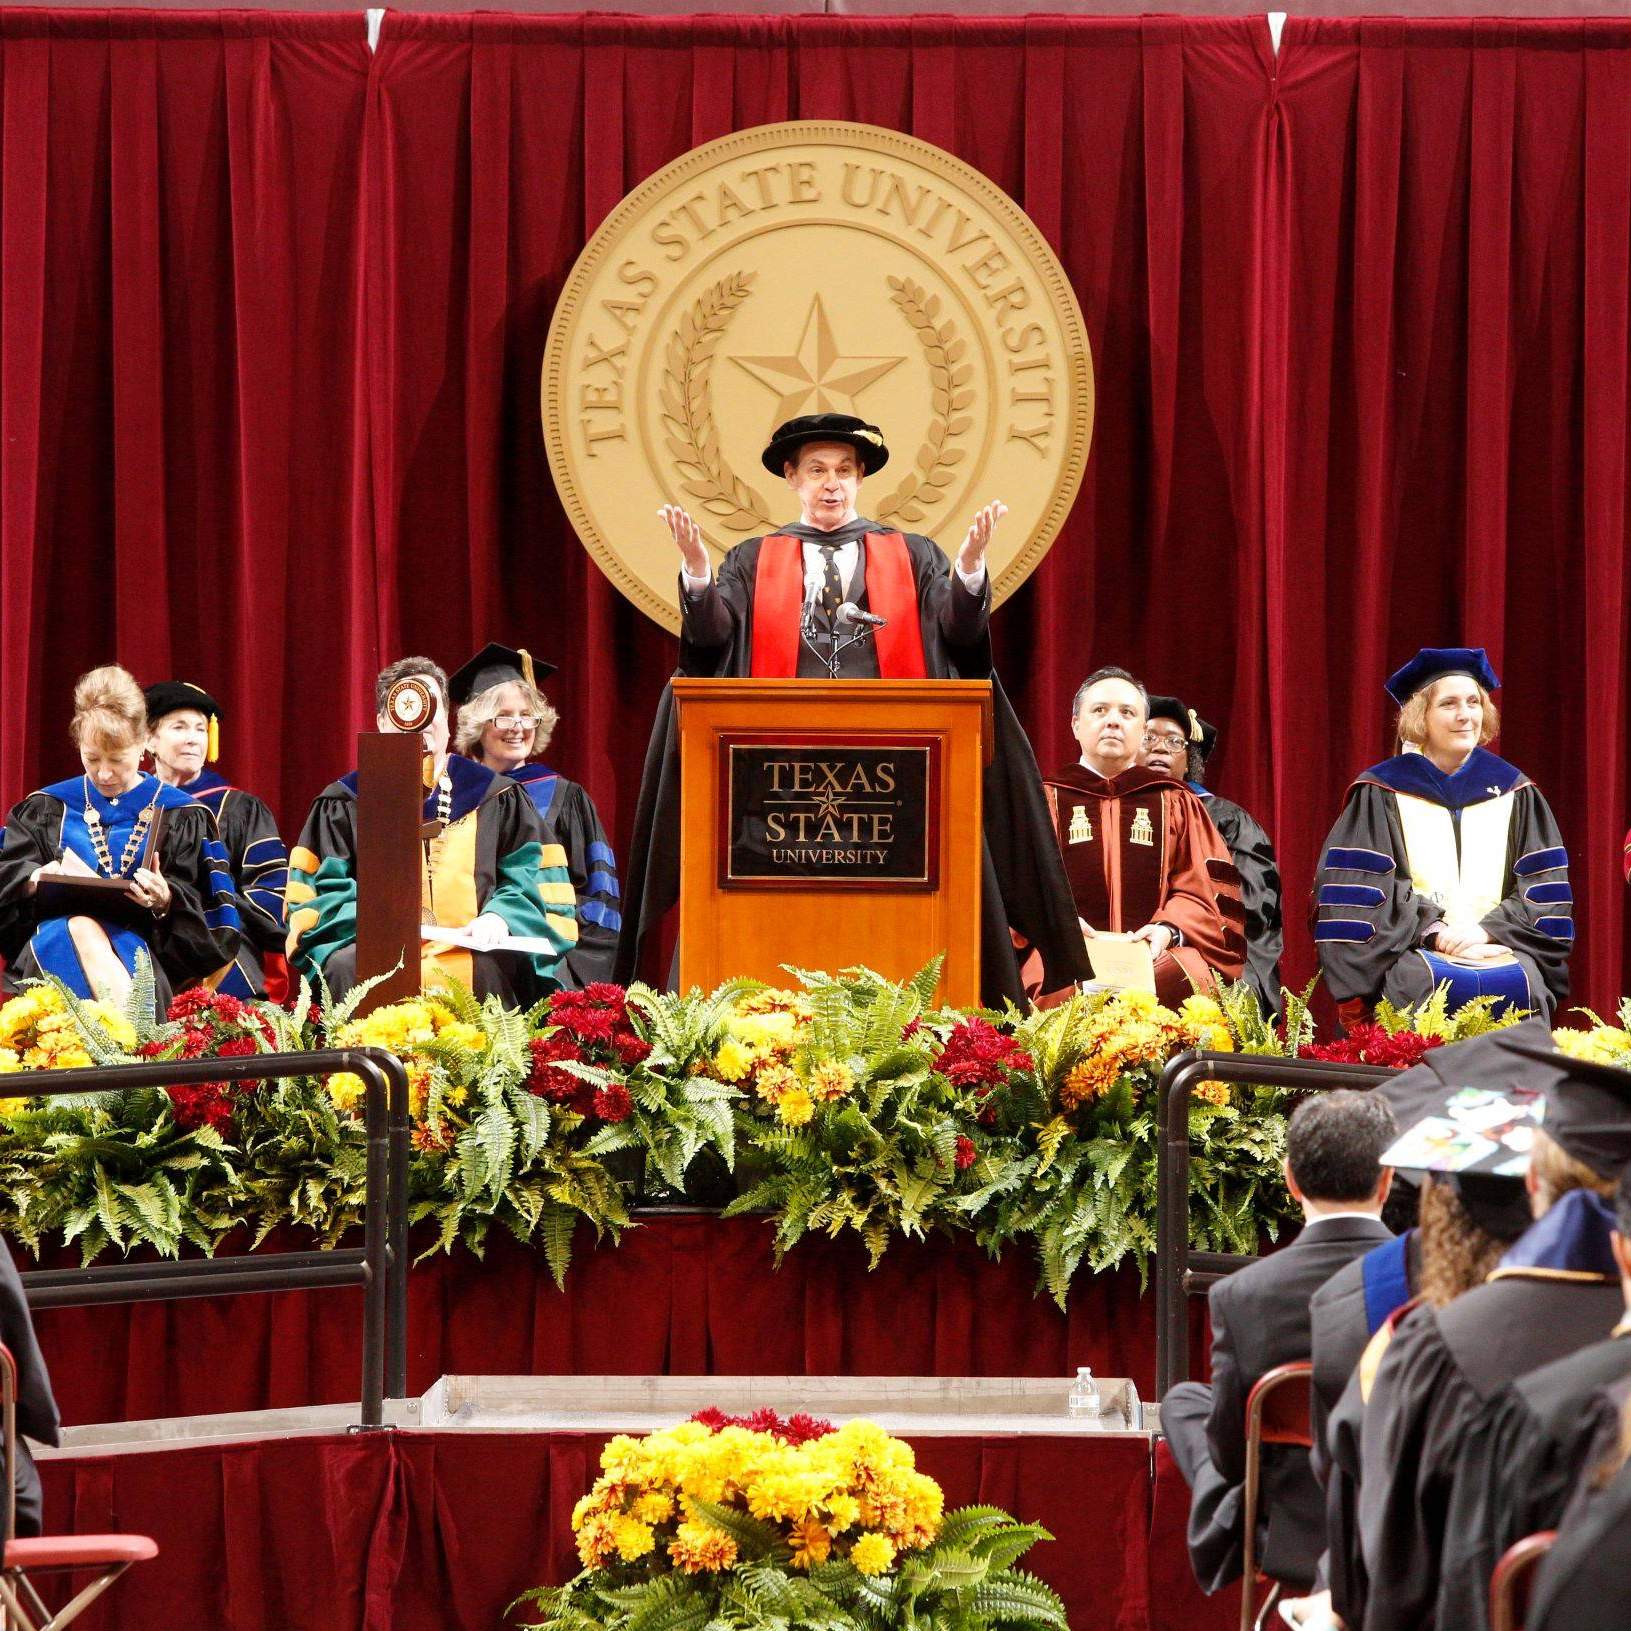 Provost Gene Bourgeois, Vice President of Academic Affairs, addresses graduation candidates at the Spring 2016 Texas State University commencement ceremonies.